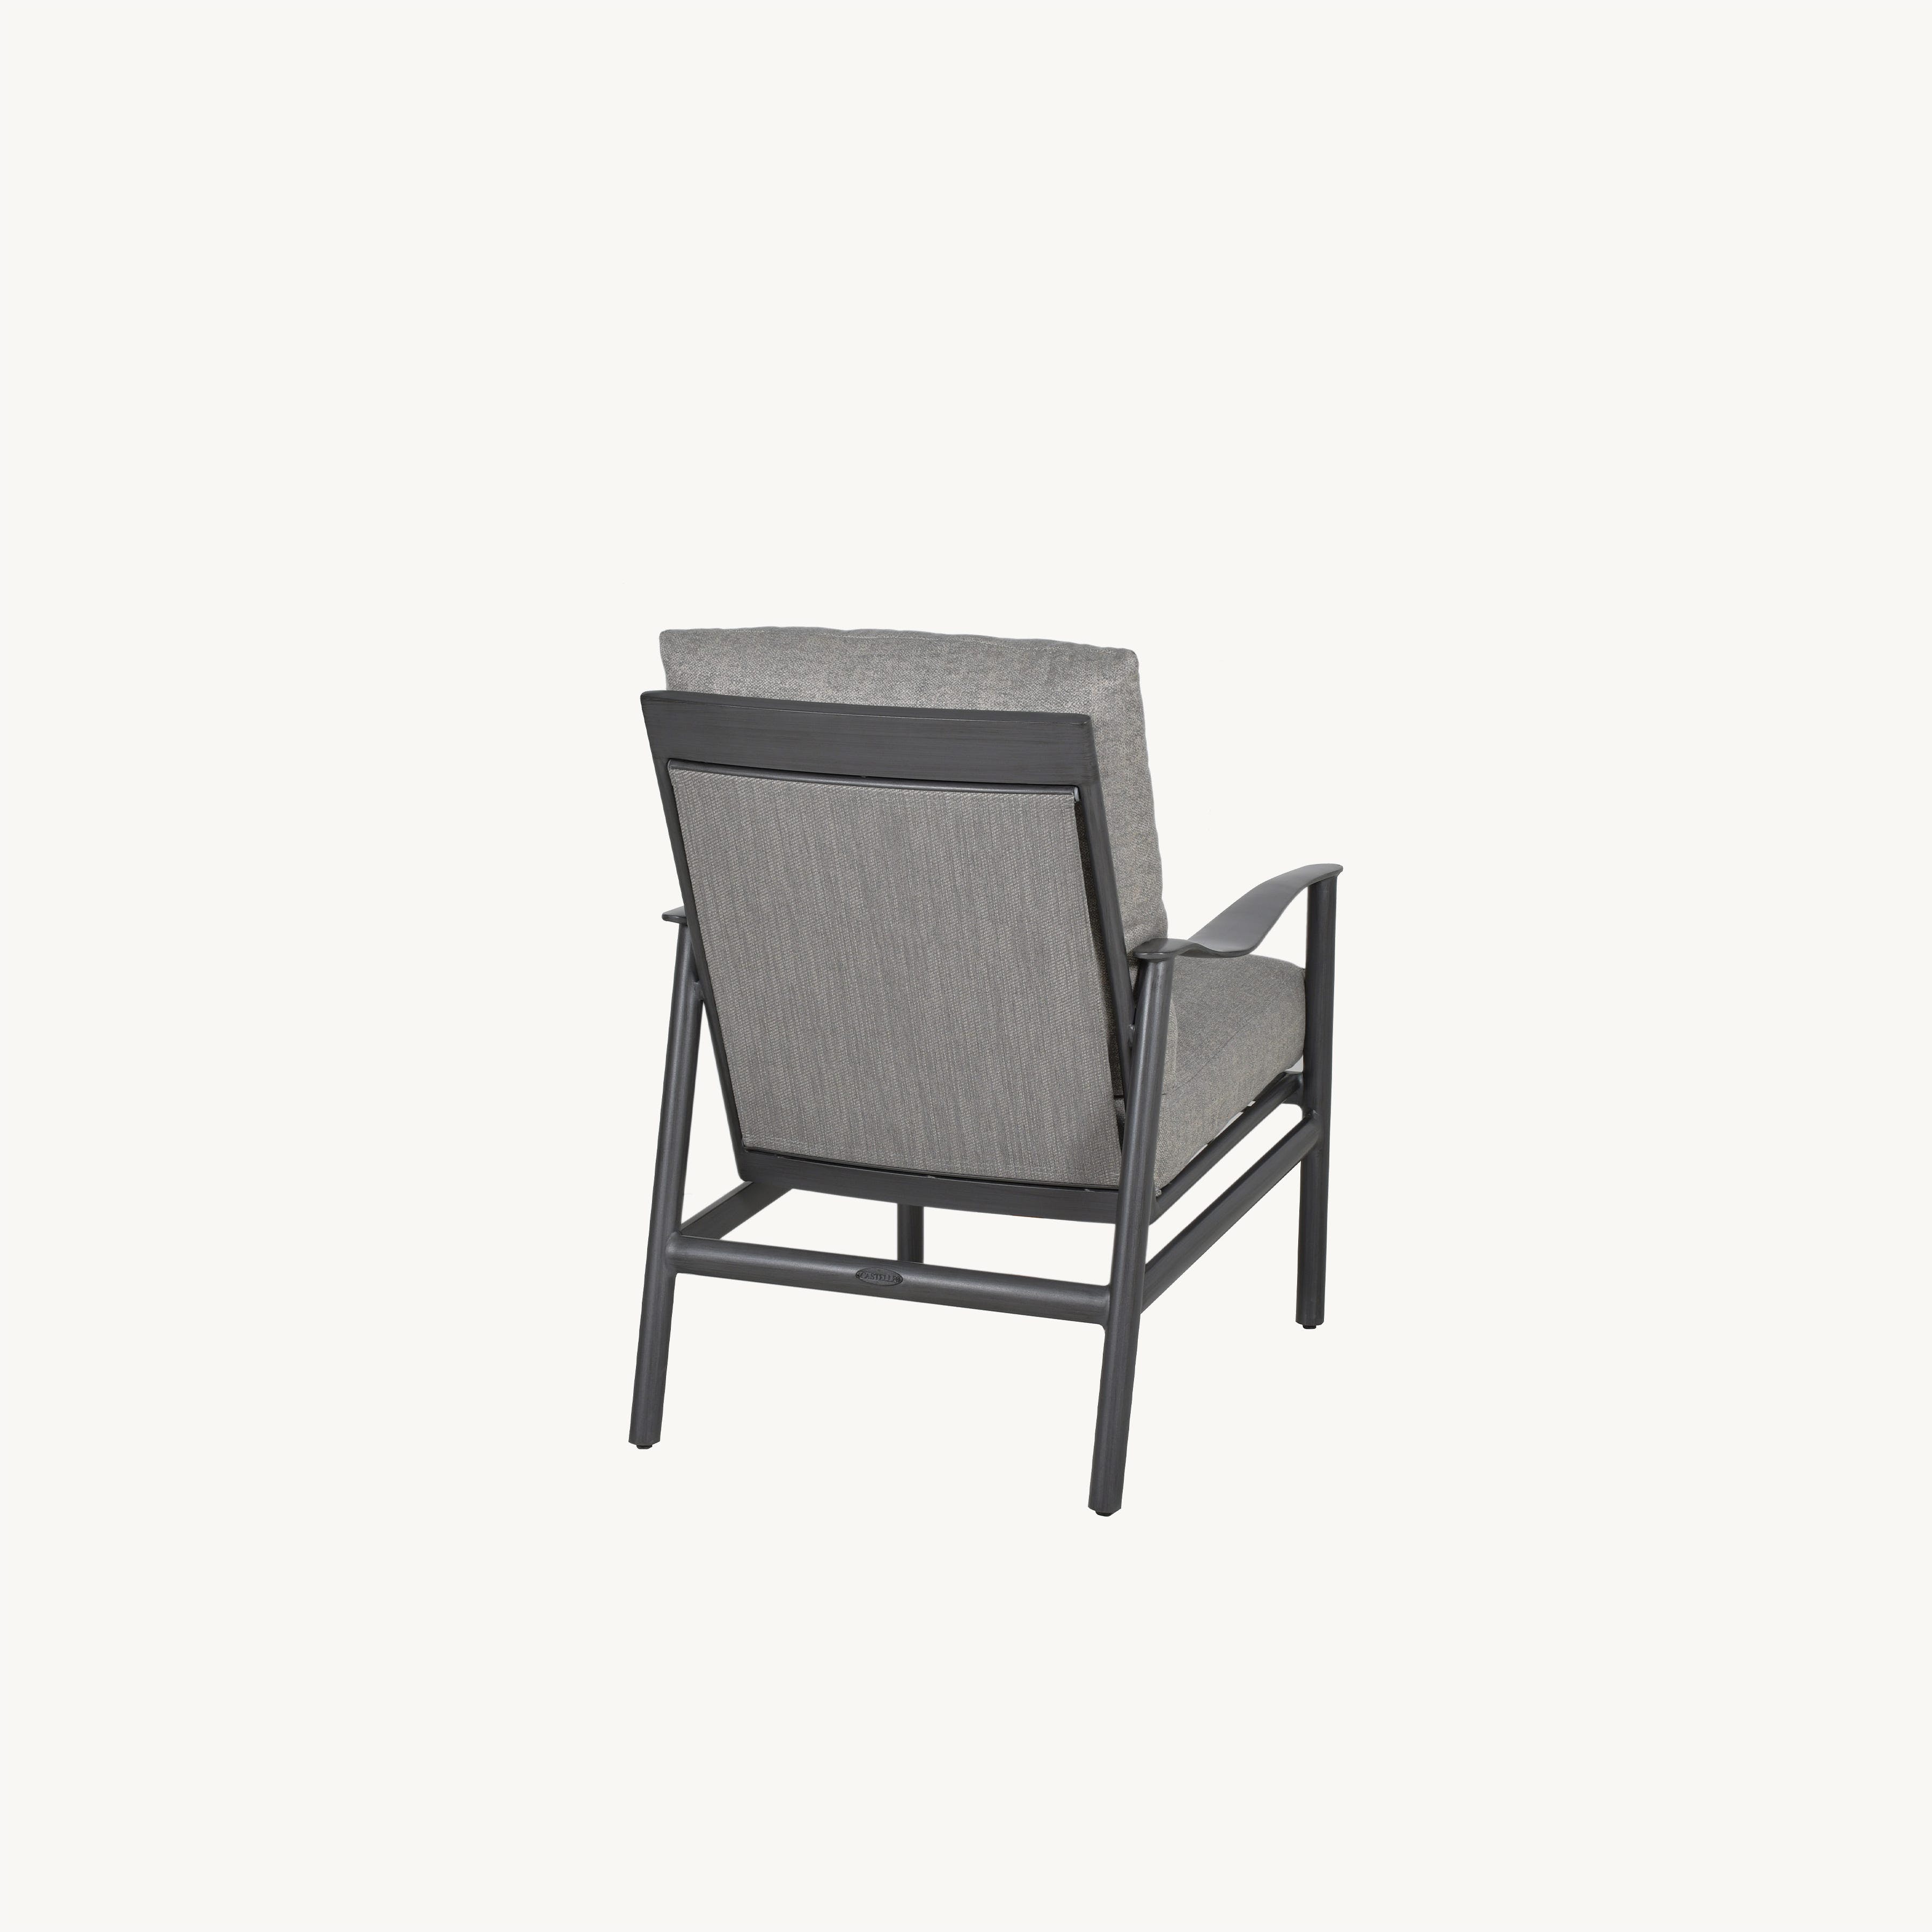 Barbados Cushion Dining Chair By Castelle